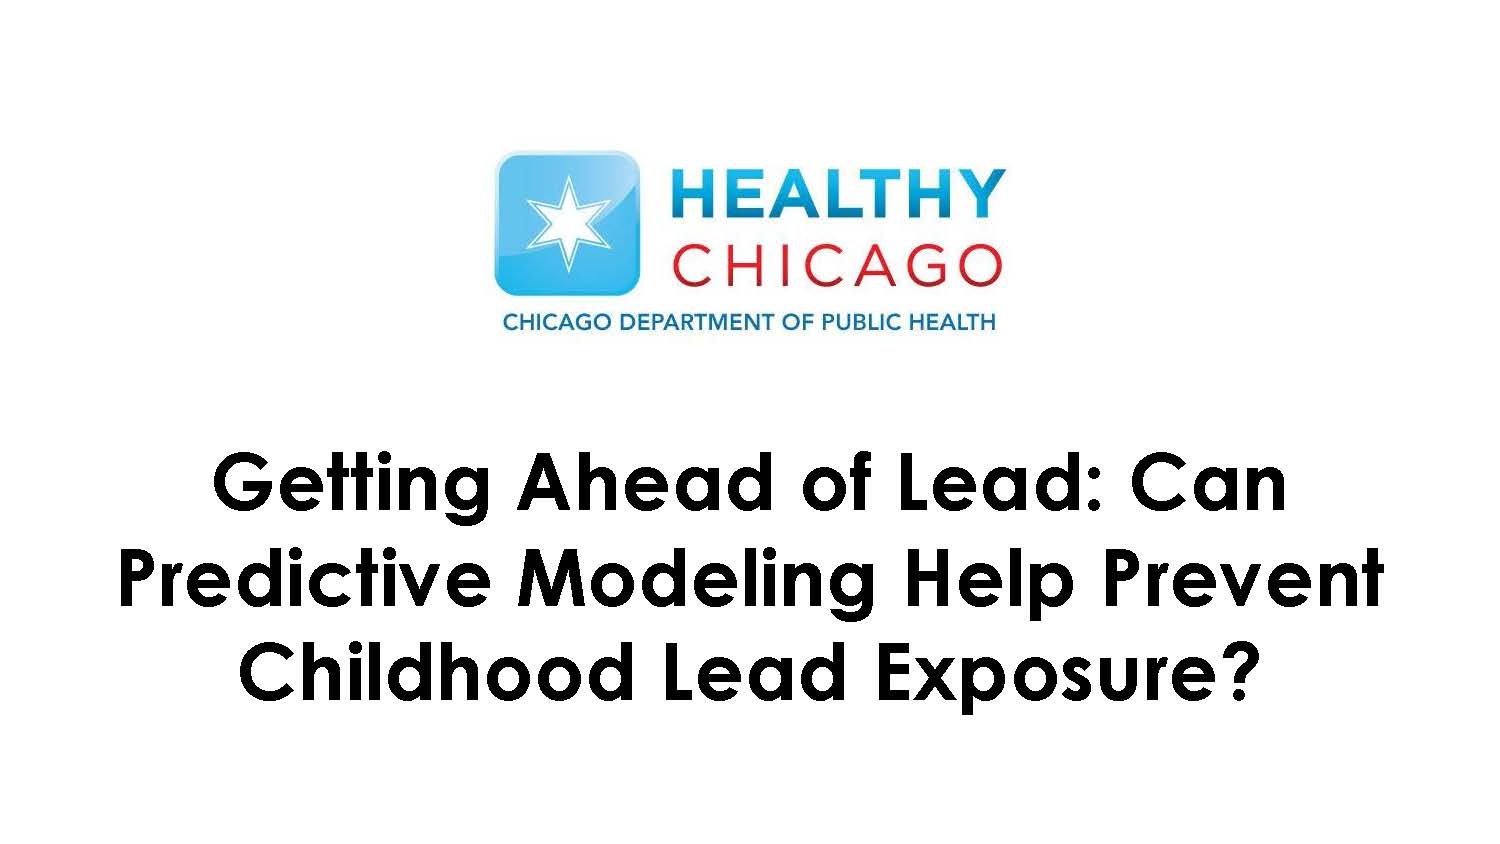 NCHH Webinar: Getting Ahead of Lead: Can Predictive Modeling Help Prevent Childhood Lead Exposure? [slides]